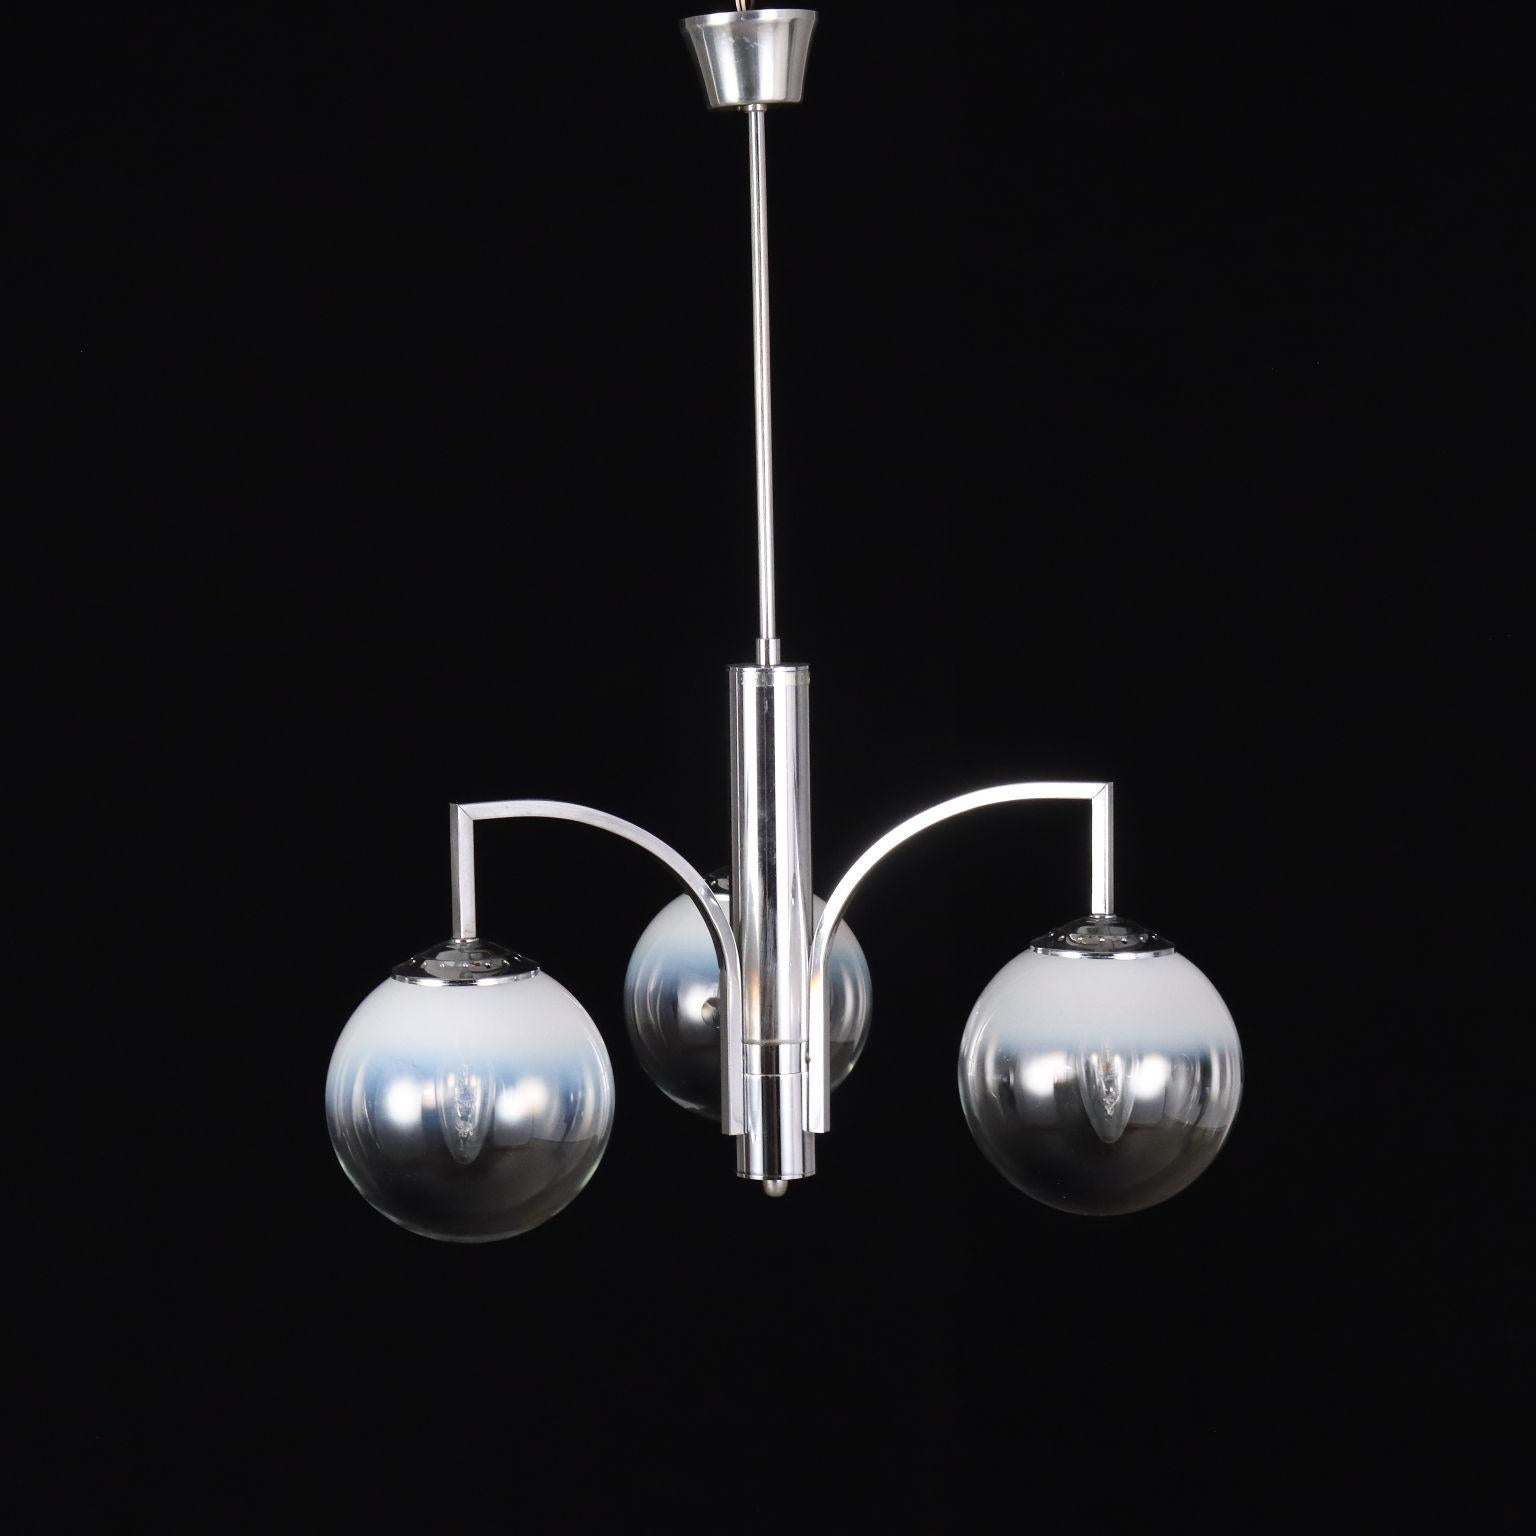 Chrome metal ceiling lamp with glass diffusers.